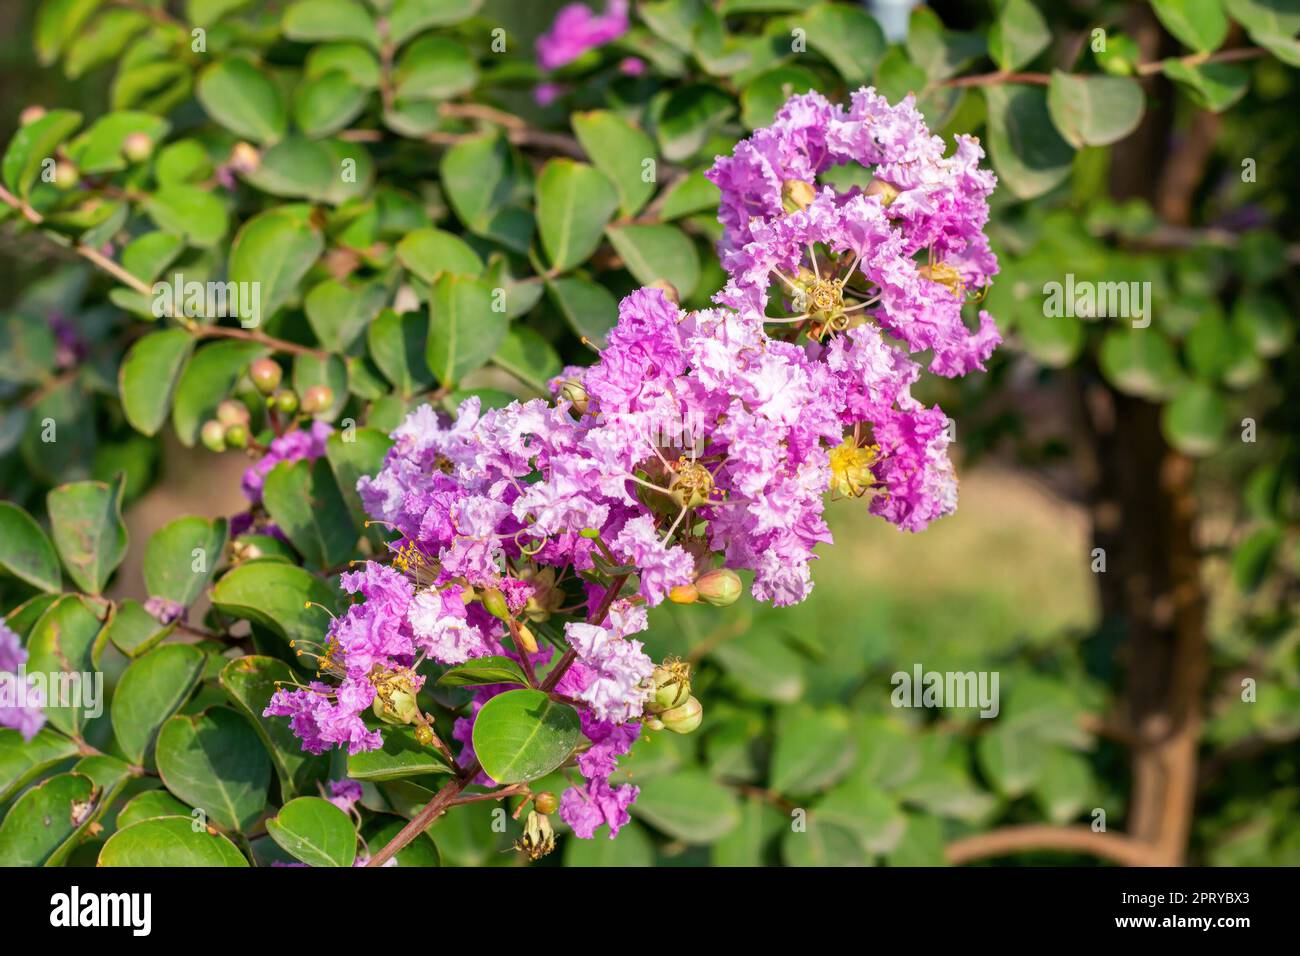 Bright pink Lagerstroemia Indica (Crape Myrtle) flowers with green leaves on branches in the garden in summer. Stock Photo